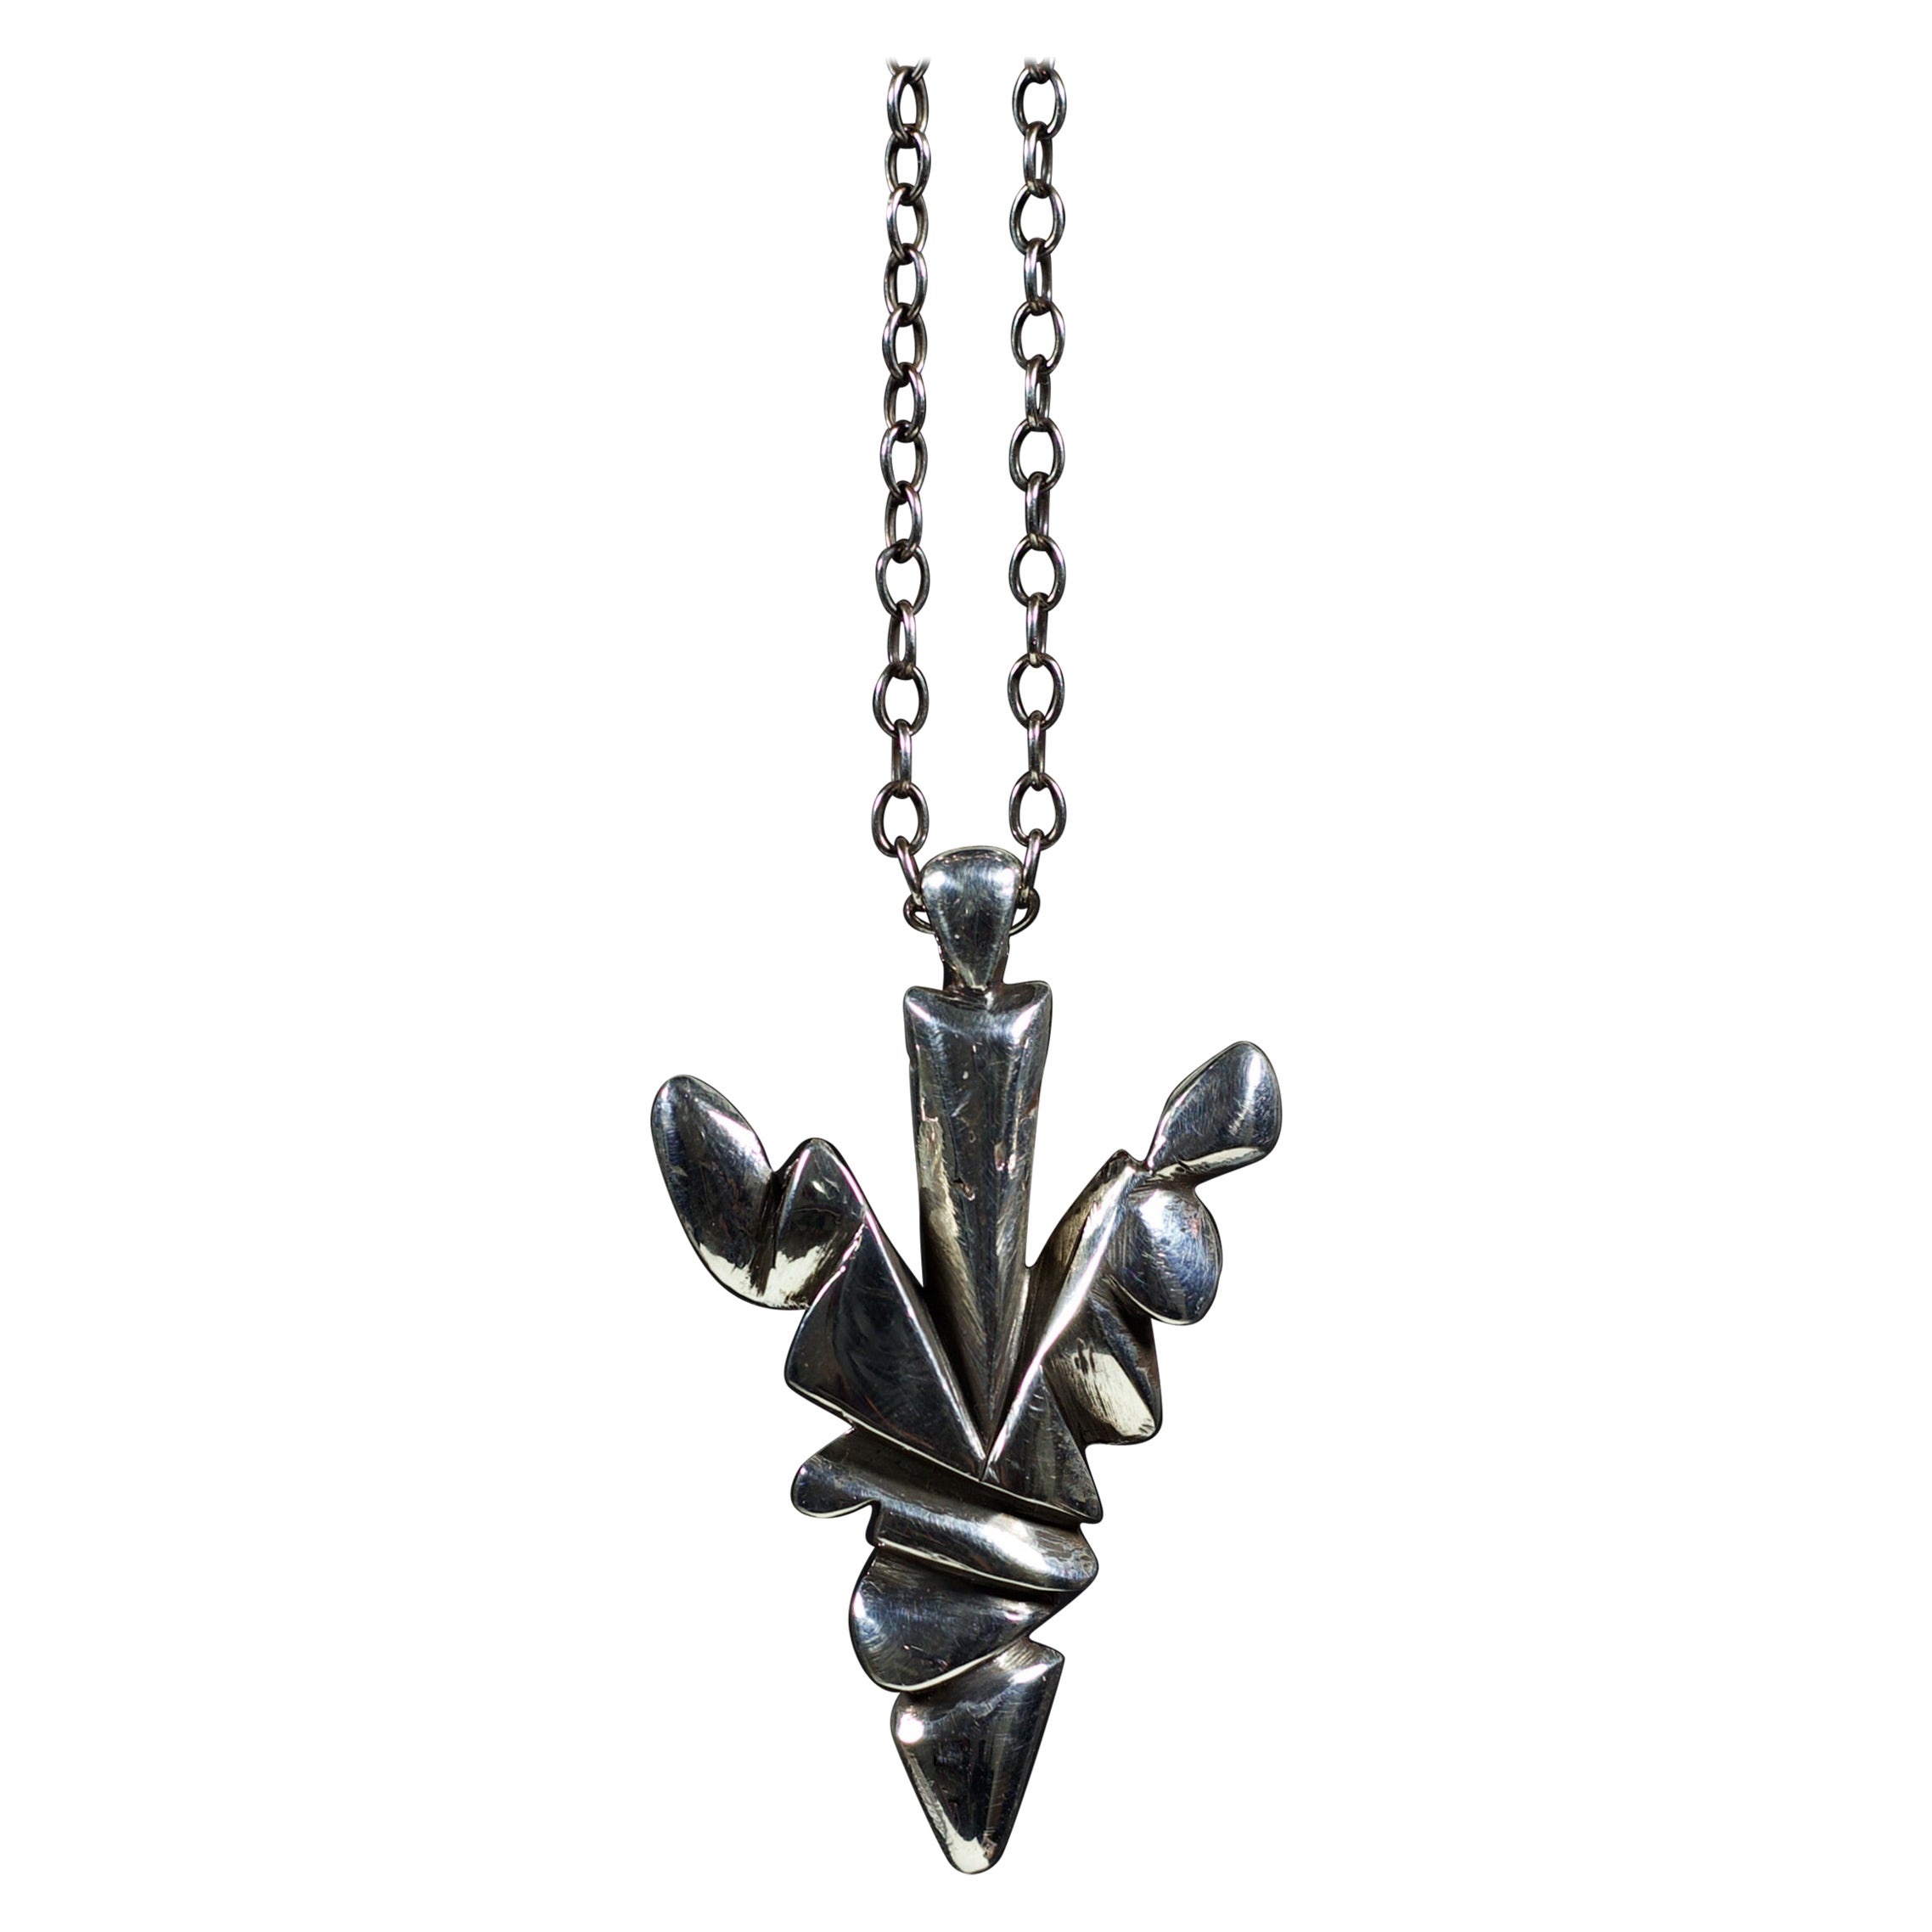 Hand-carved and cast by Ken Fury, the Arrowhead pendant is a symbol of strength, resilience, courage, and determination. Its powerful symbolism pays homage to Indigenous peoples here in the Americas, as well as the ancient ancestors worldwide who